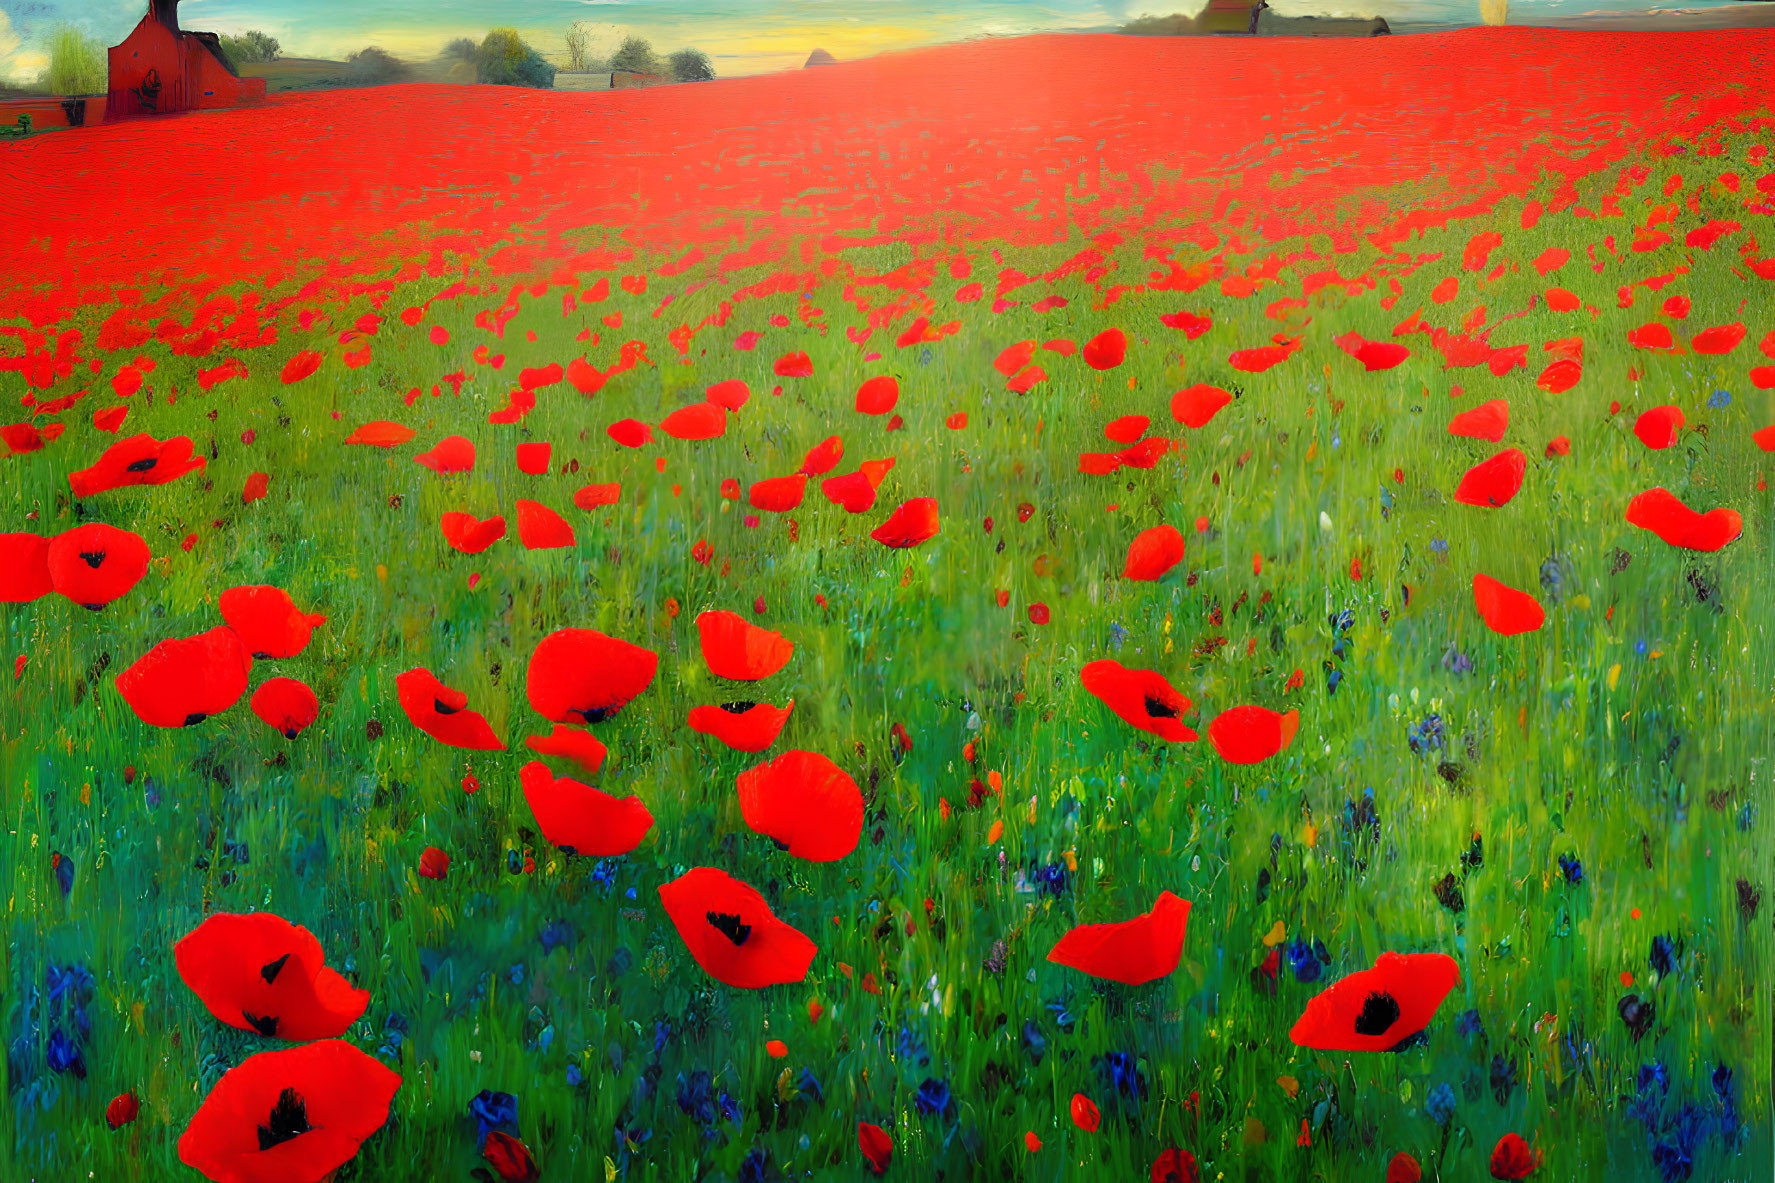 Scenic red poppy field with wildflowers and distant barn under warm sky